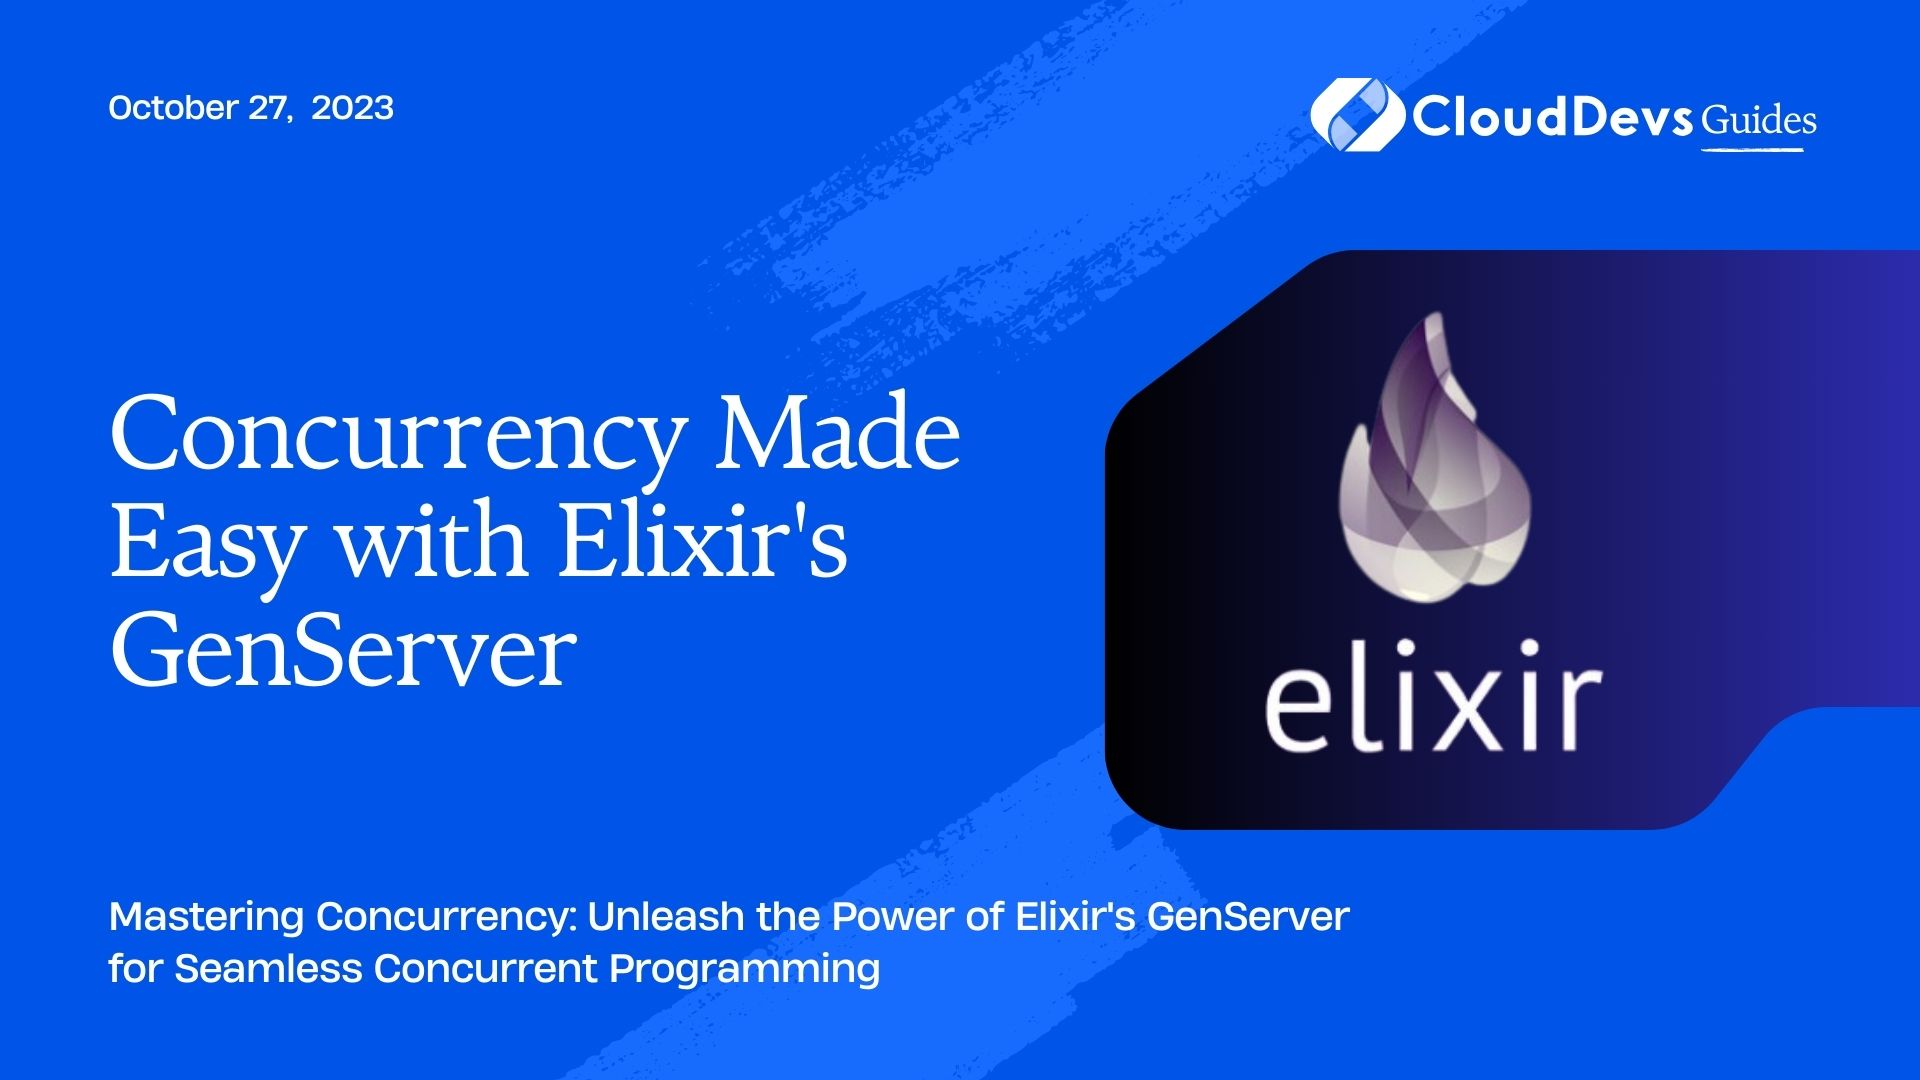 Concurrency Made Easy with Elixir's GenServer